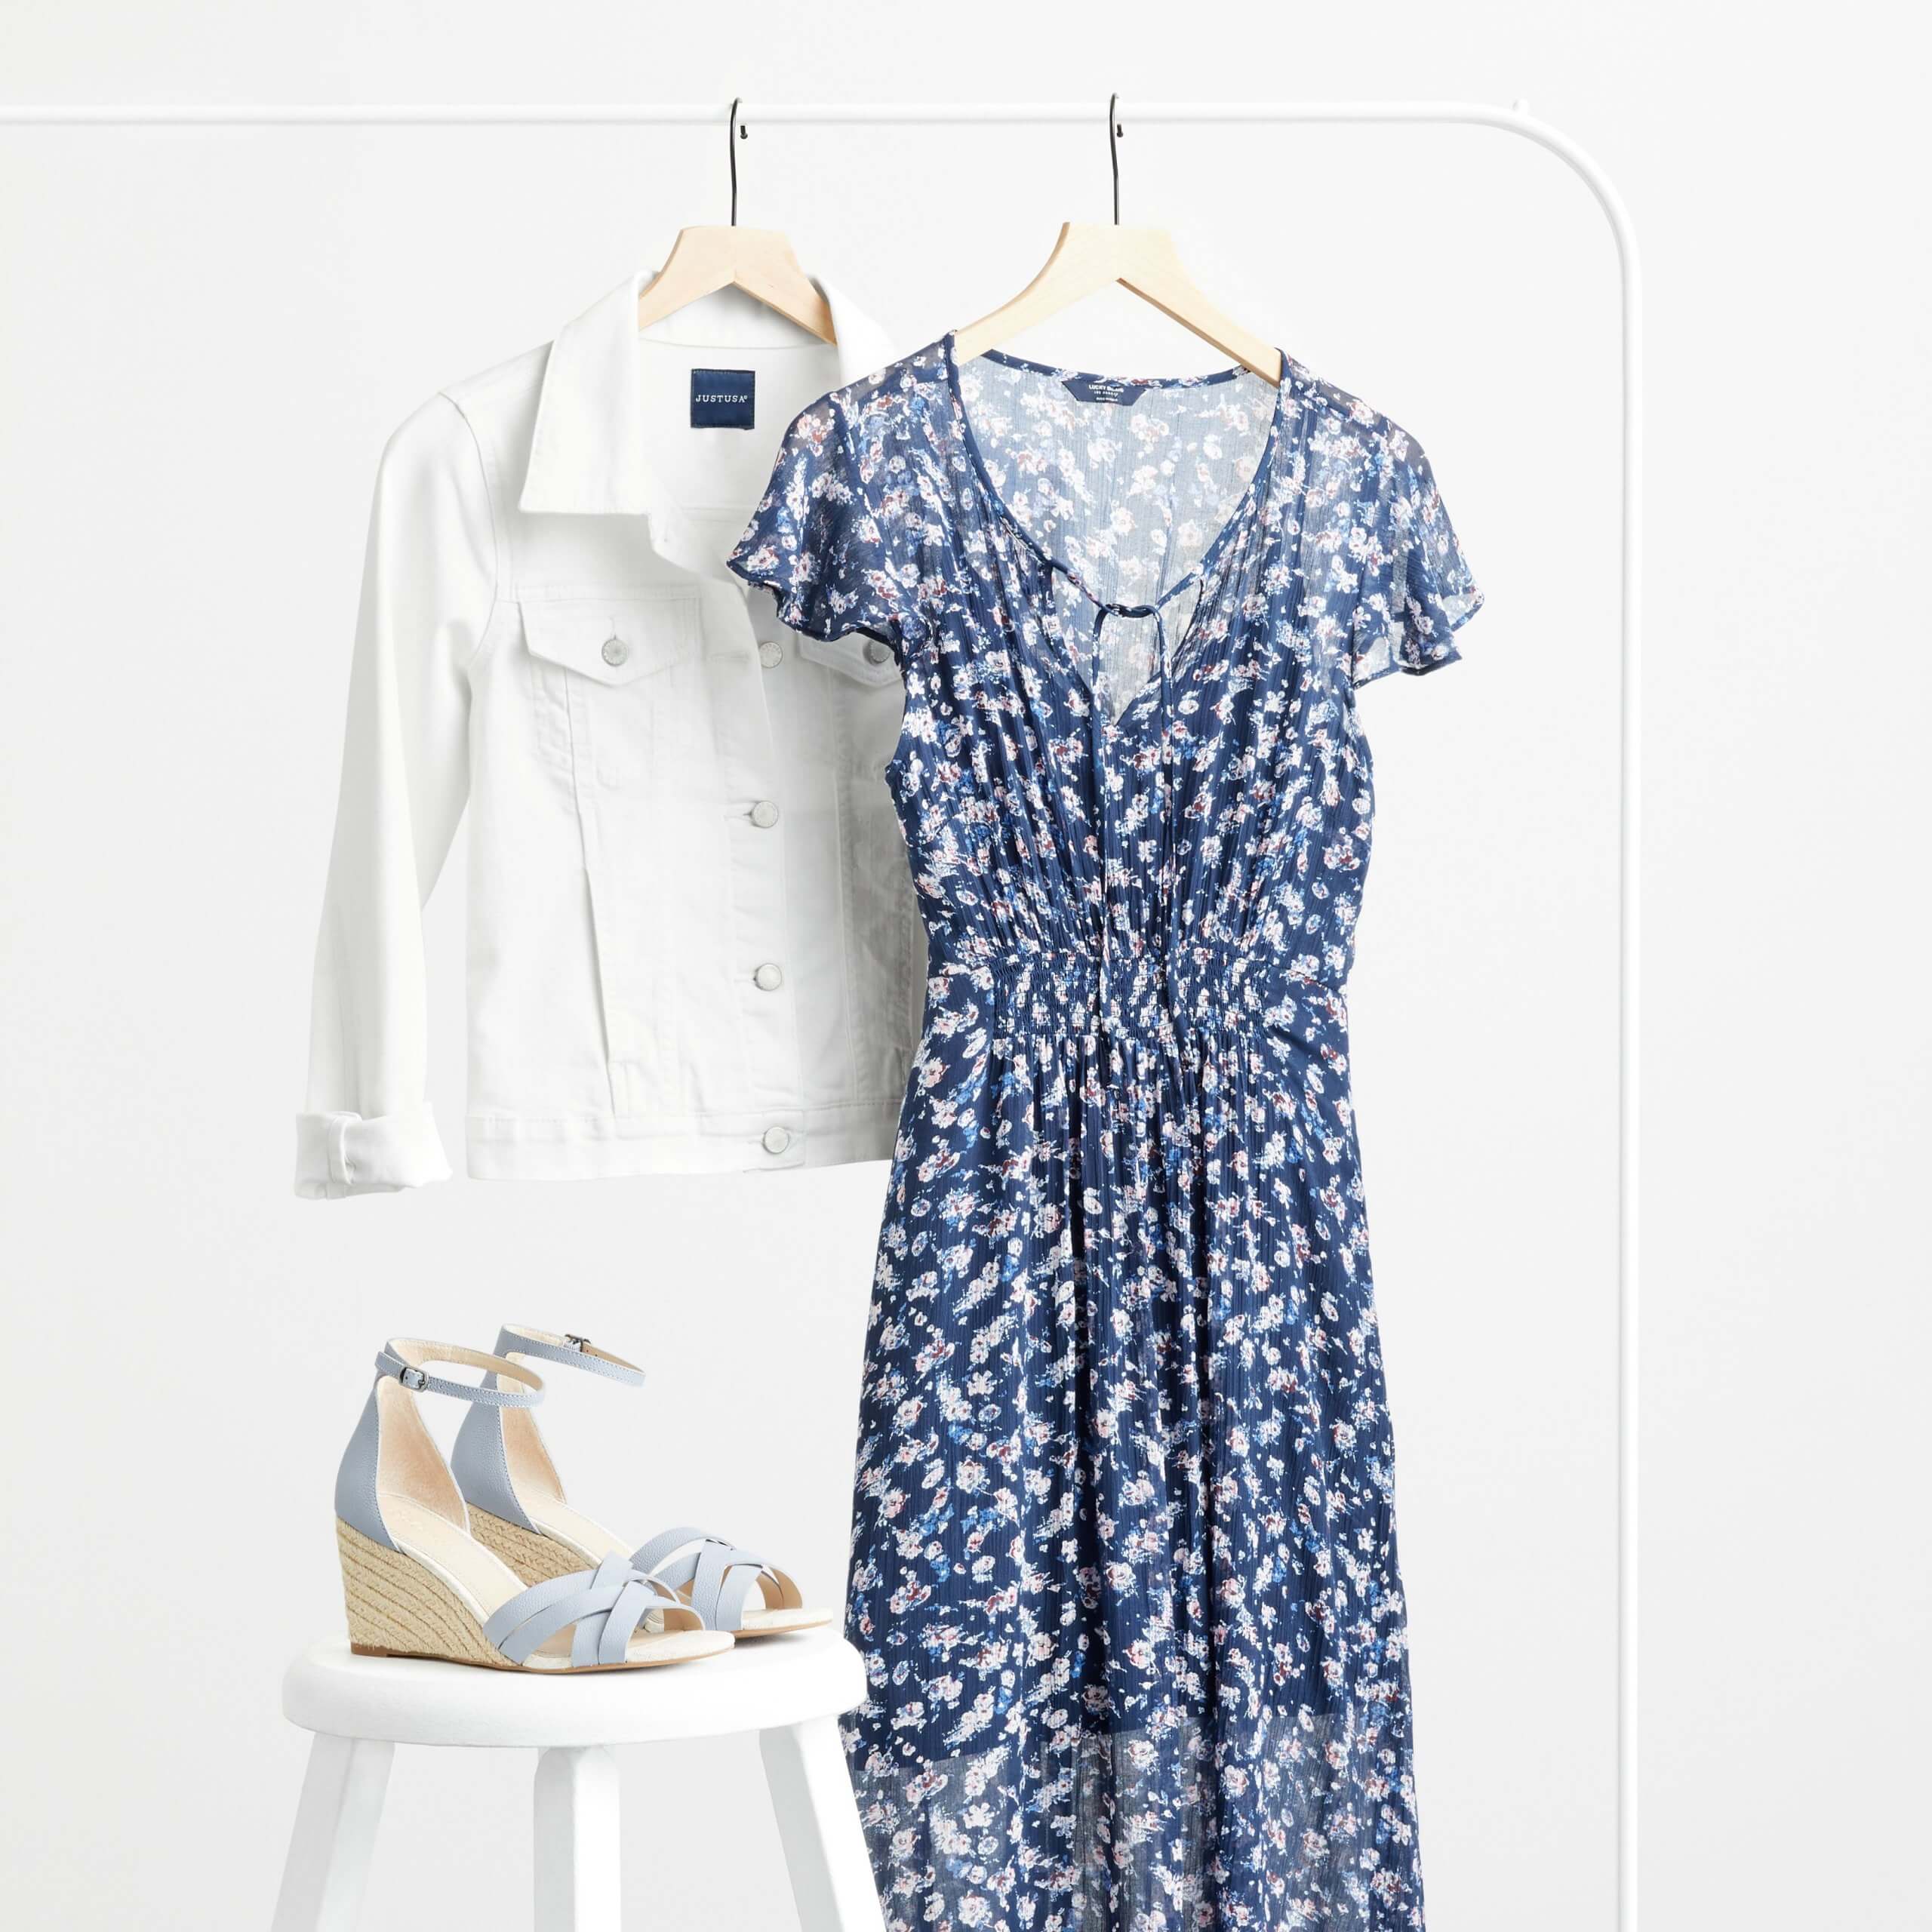 Stitch Fix Women’s rack image featuring white denim jacket and blue and white printed midi dress on hangers on white rack, next to blue wedges on a white stool.